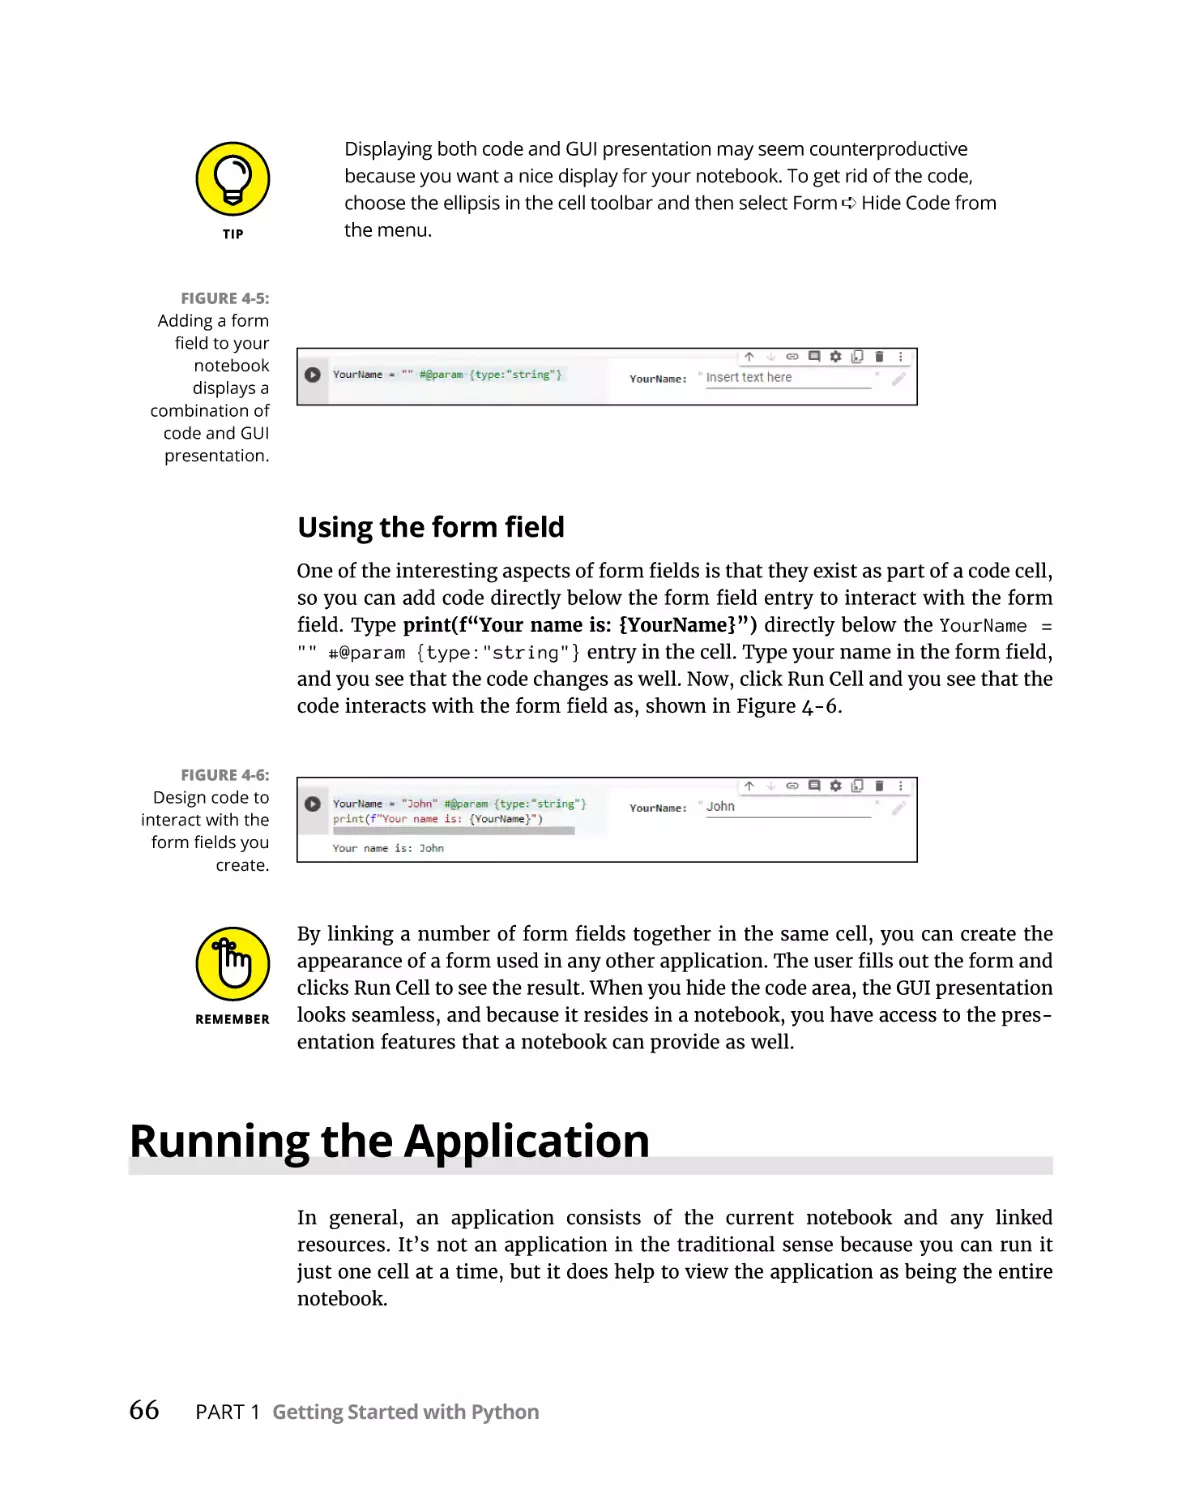 Using the form field
Running the Application